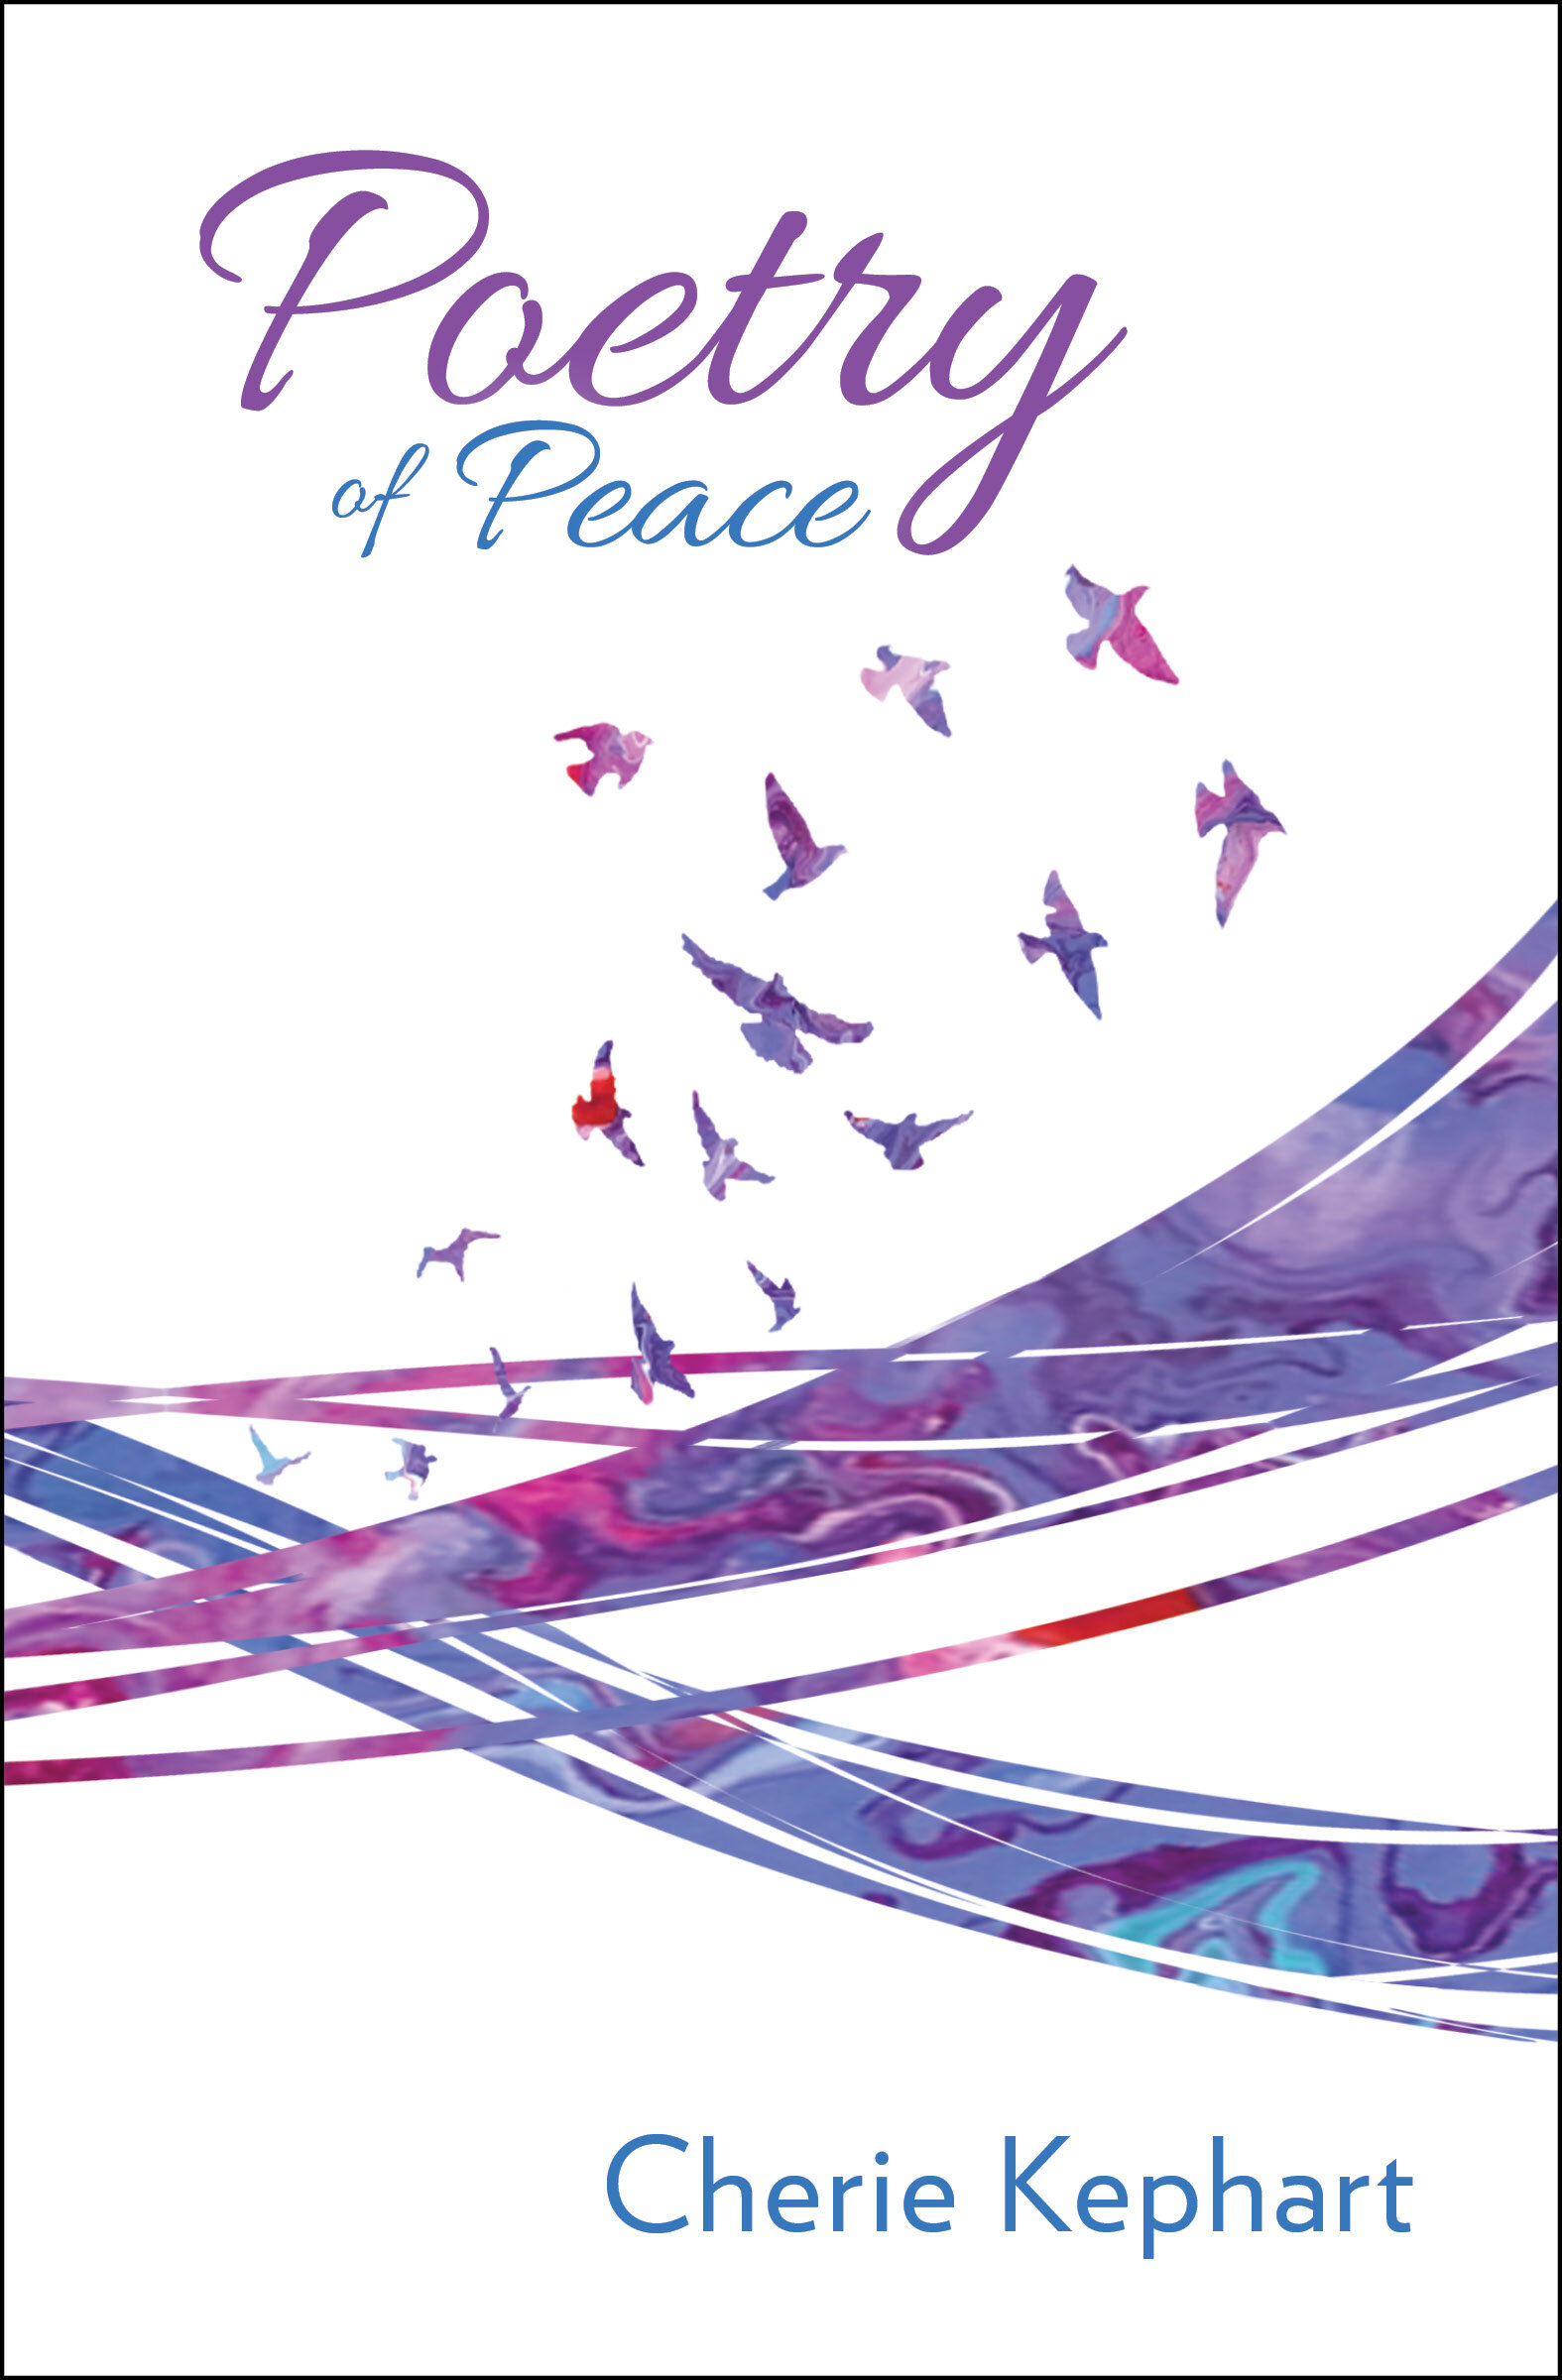 PoetryofPeace_Cover_Front.jpg